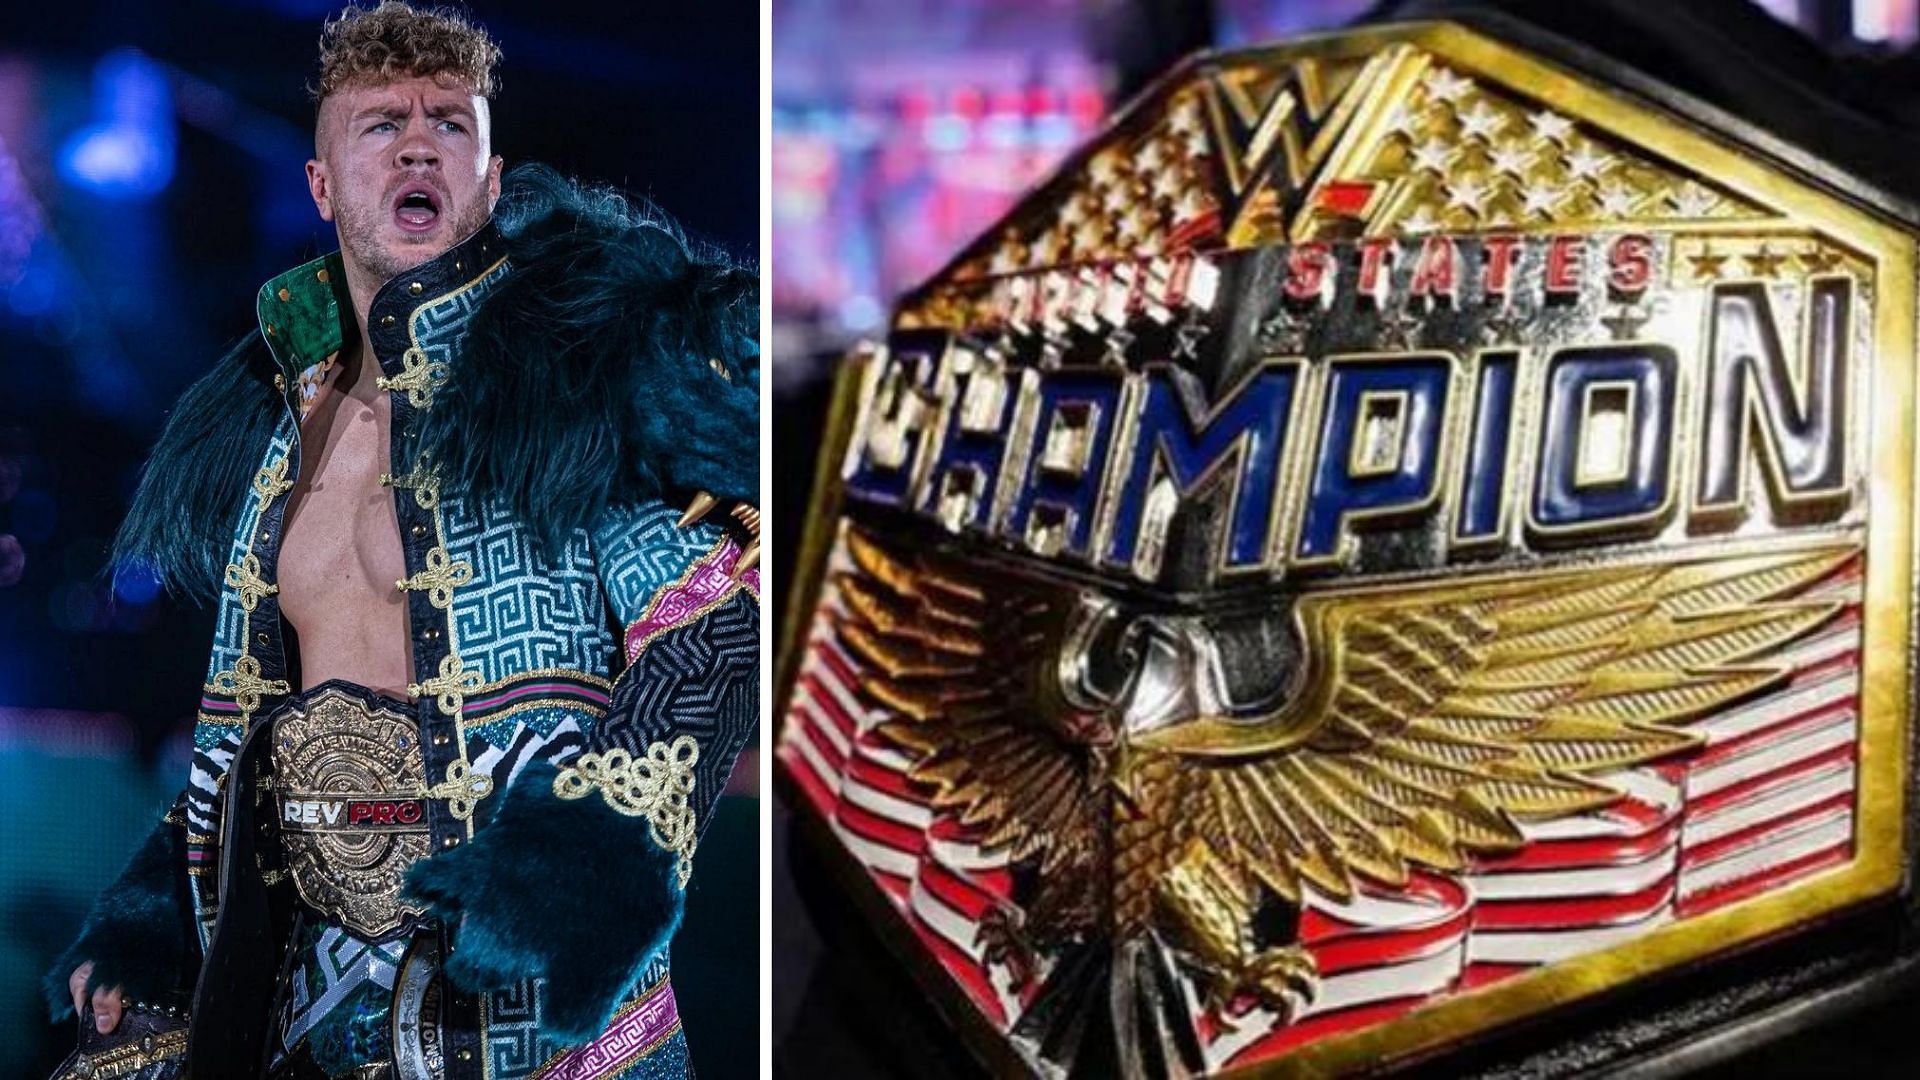 The NJPW-AEW pay-per-view apparently is not open to everyone